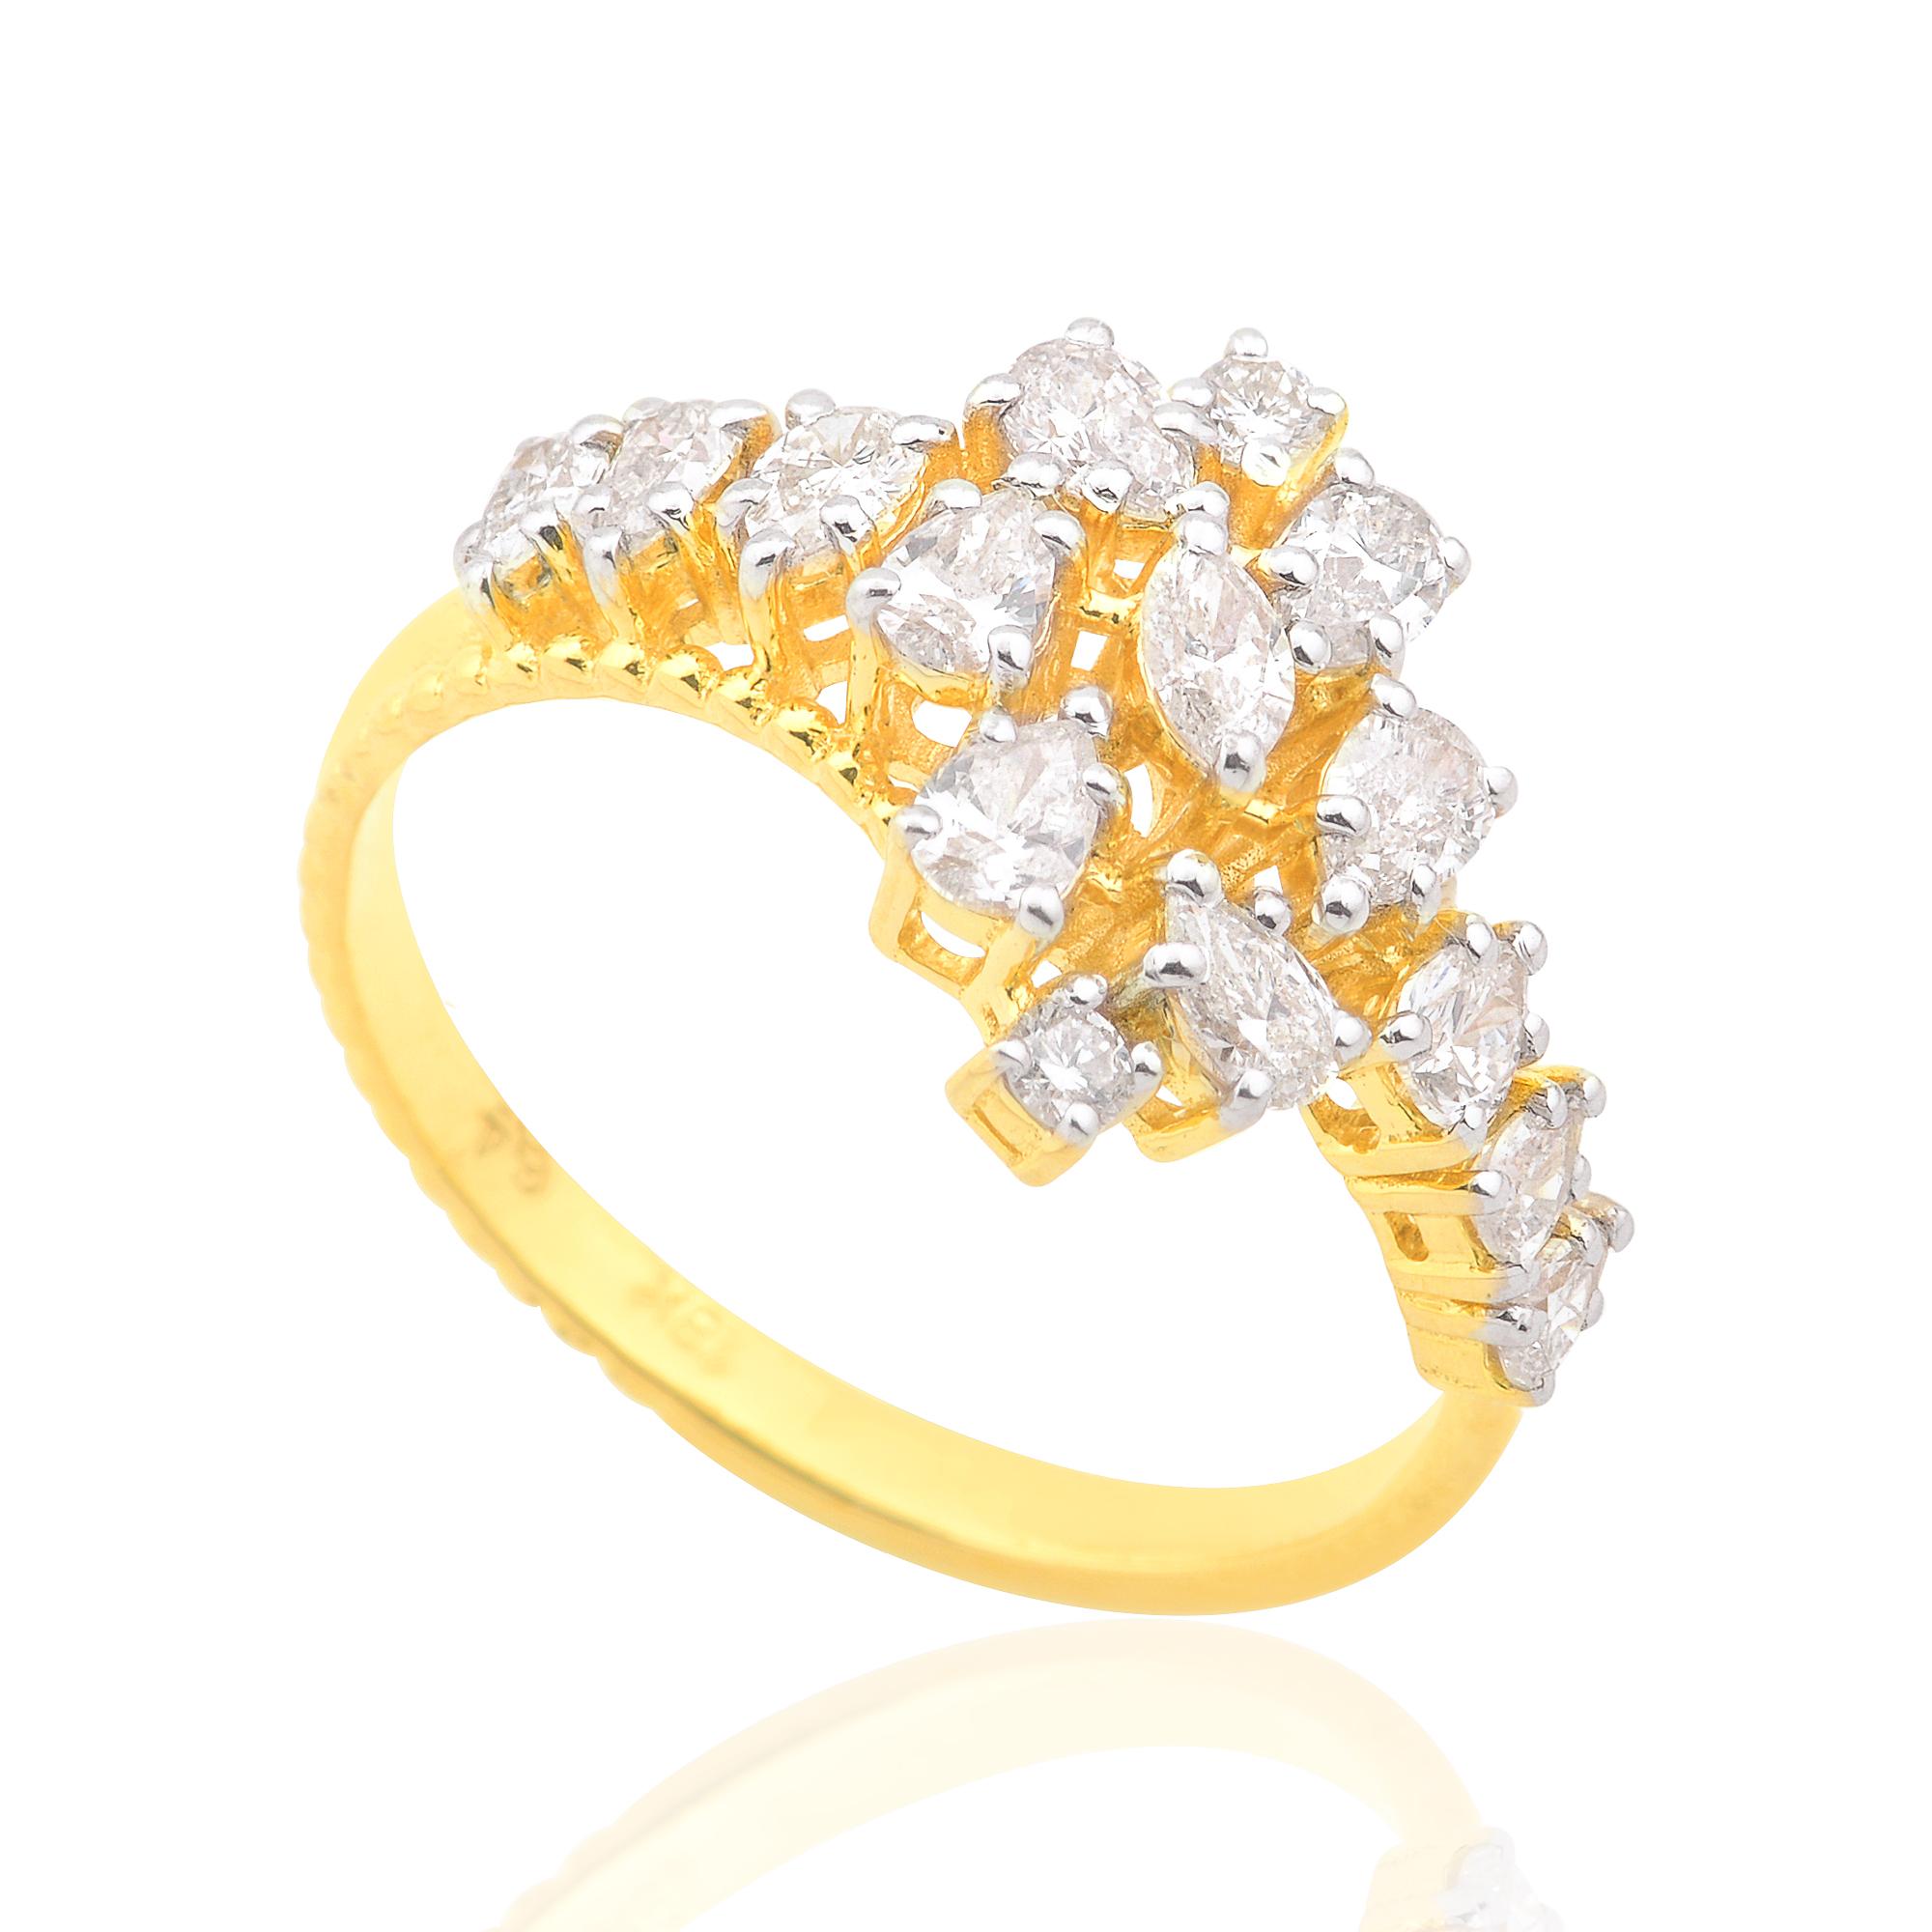 For Sale:  SI Clarity HI Color Marquise Pear Diamond Promise Ring 18 Karat Yellow Gold 2